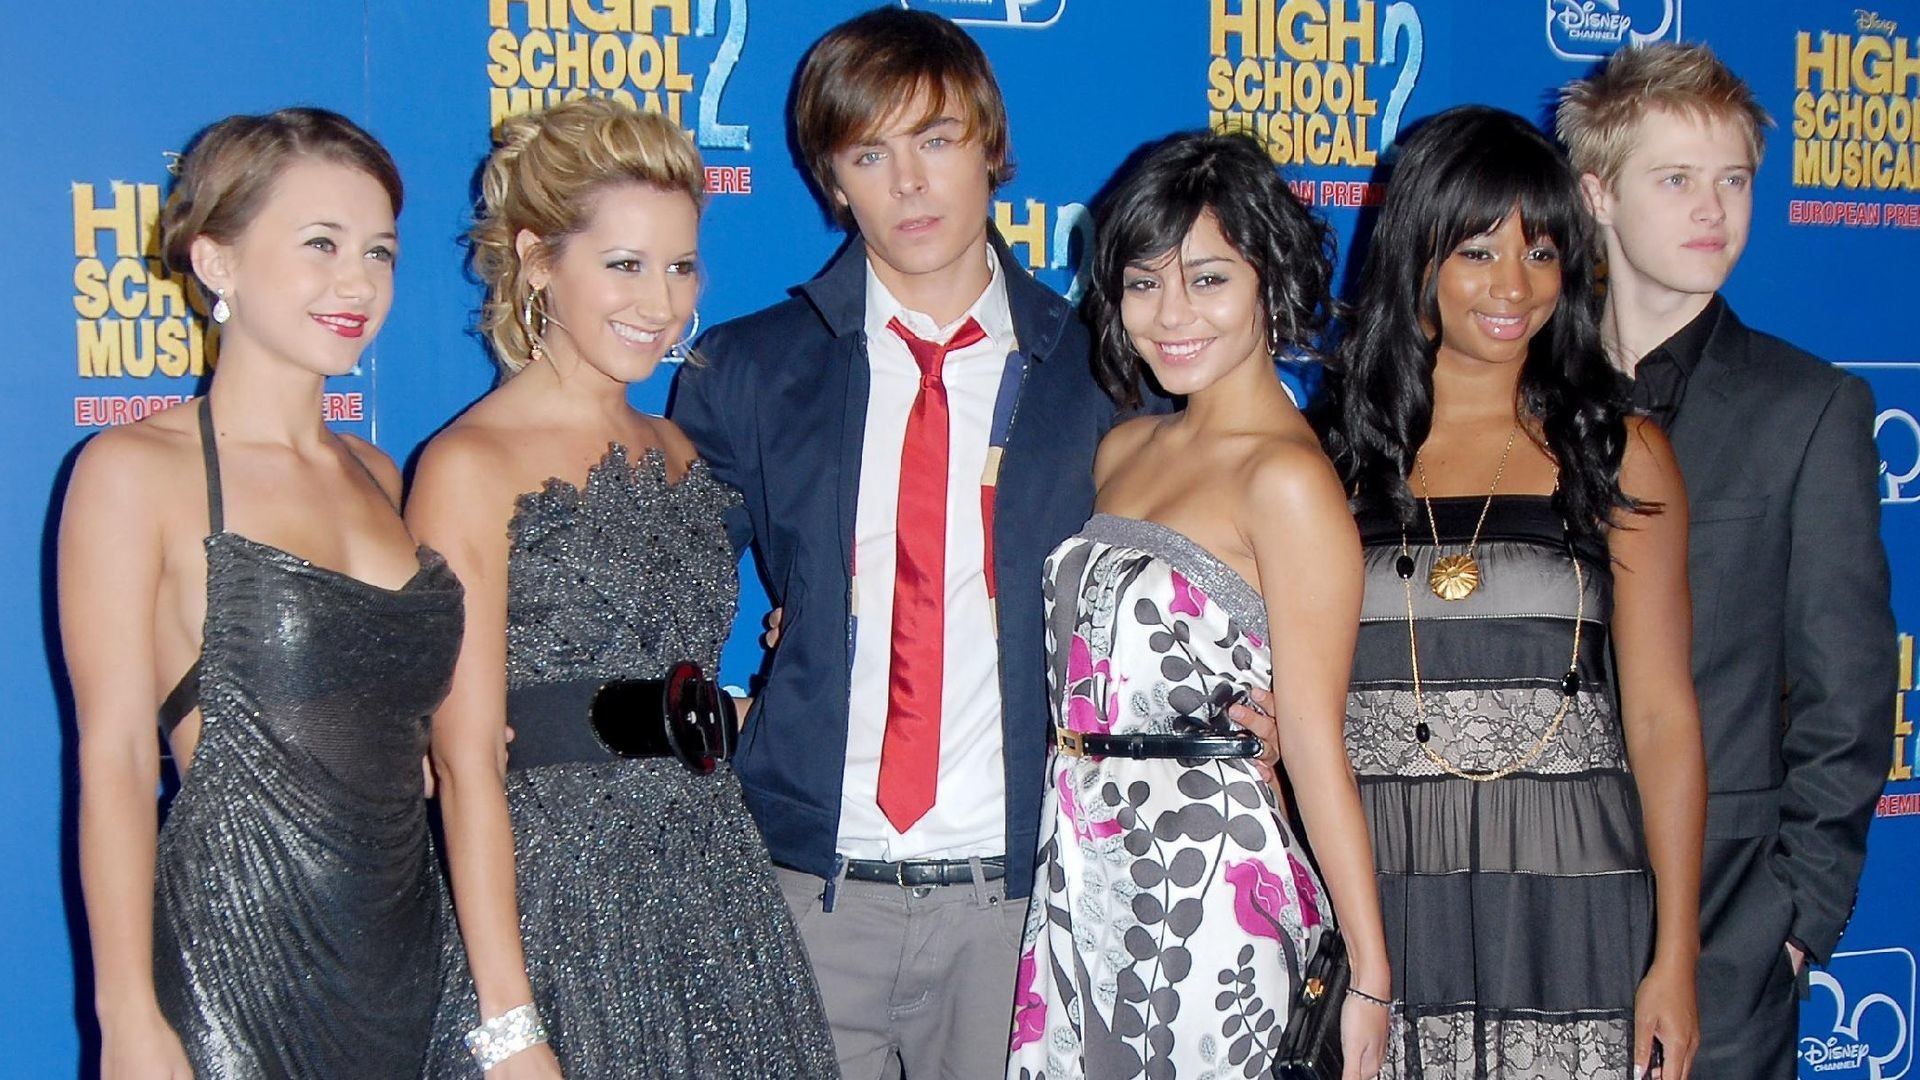 High School Musical Wallpaper (70+ pictures)